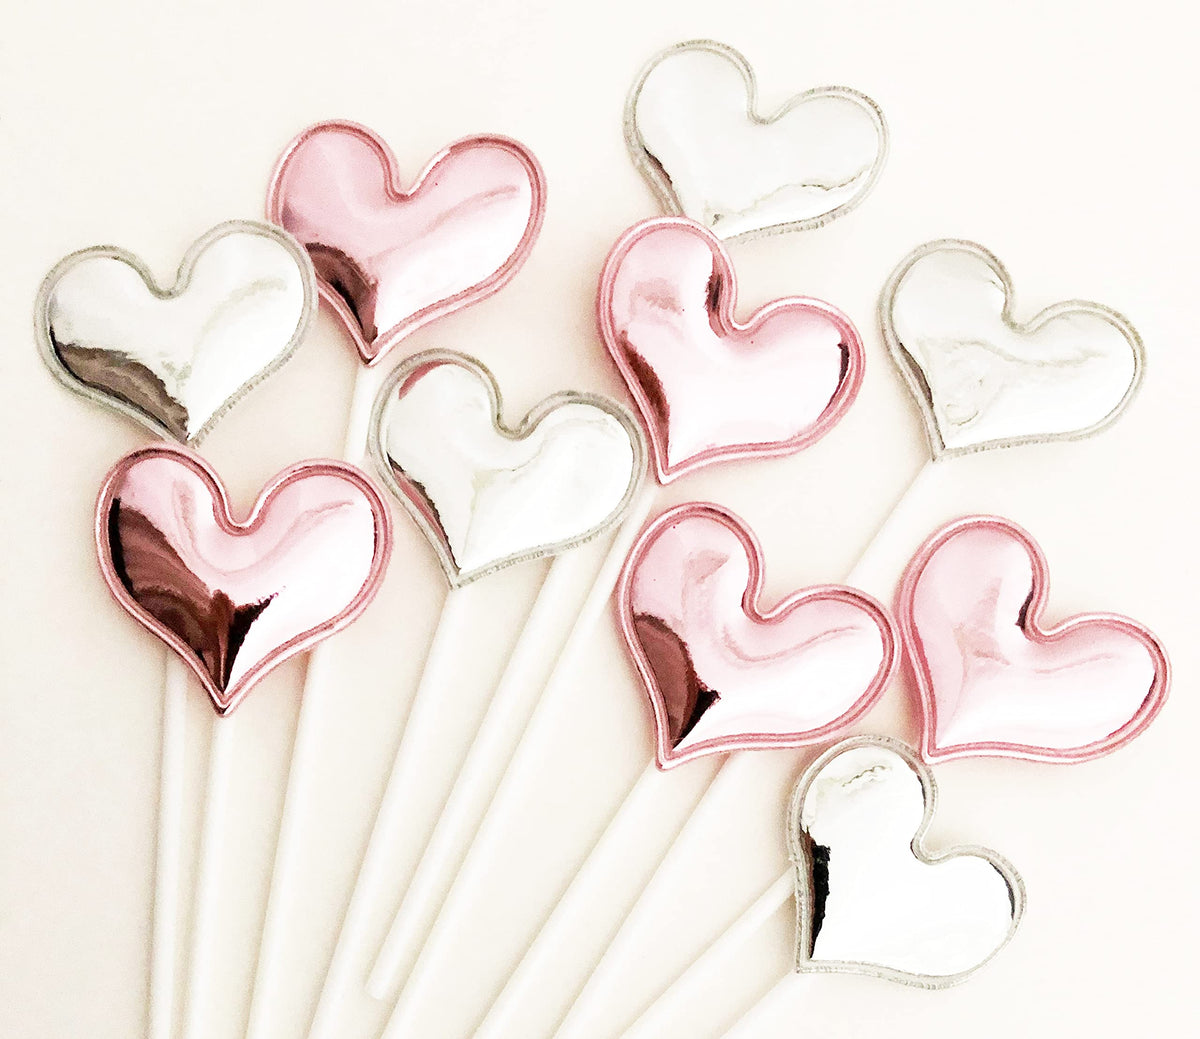 AILEXI Handmade 10 Counts Leather Reflective Glitter Cake Decorating Toppers for cake cupcake and icecream - 5 pink and 5 Silver Hearts